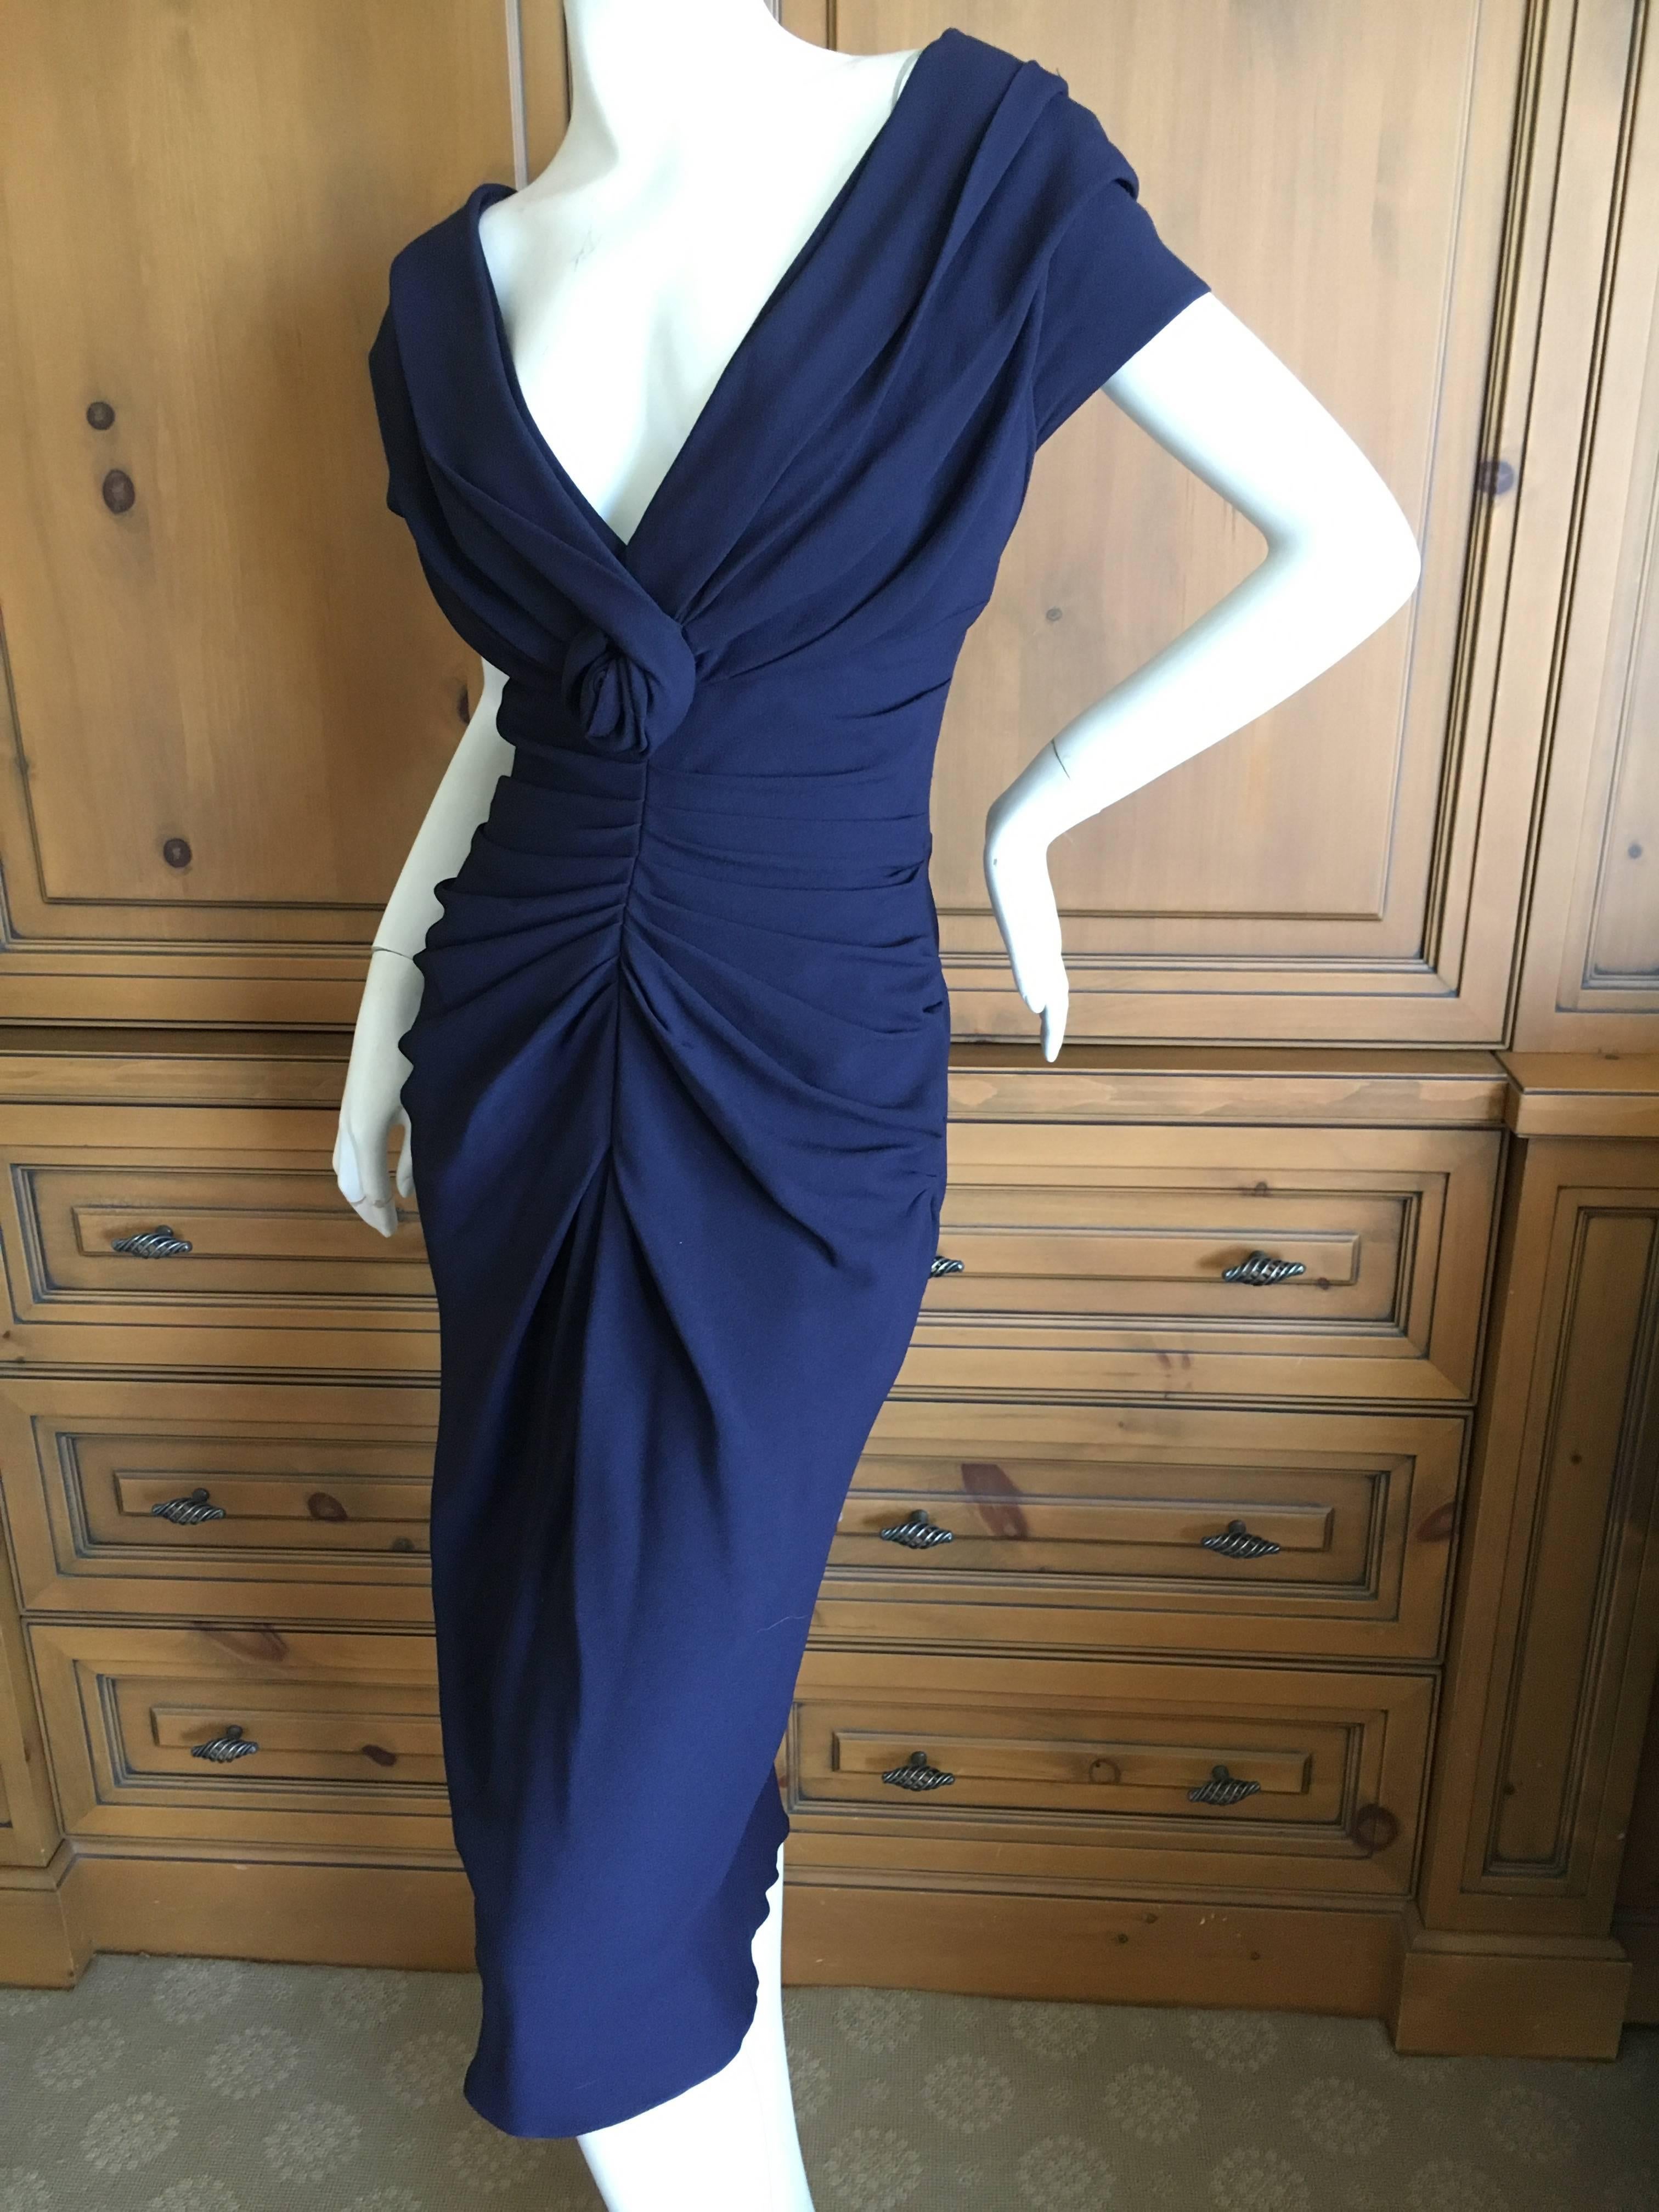 Christian Dior by John Galliano Low Cut Navy Blue Cocktail Dress In Excellent Condition For Sale In Cloverdale, CA